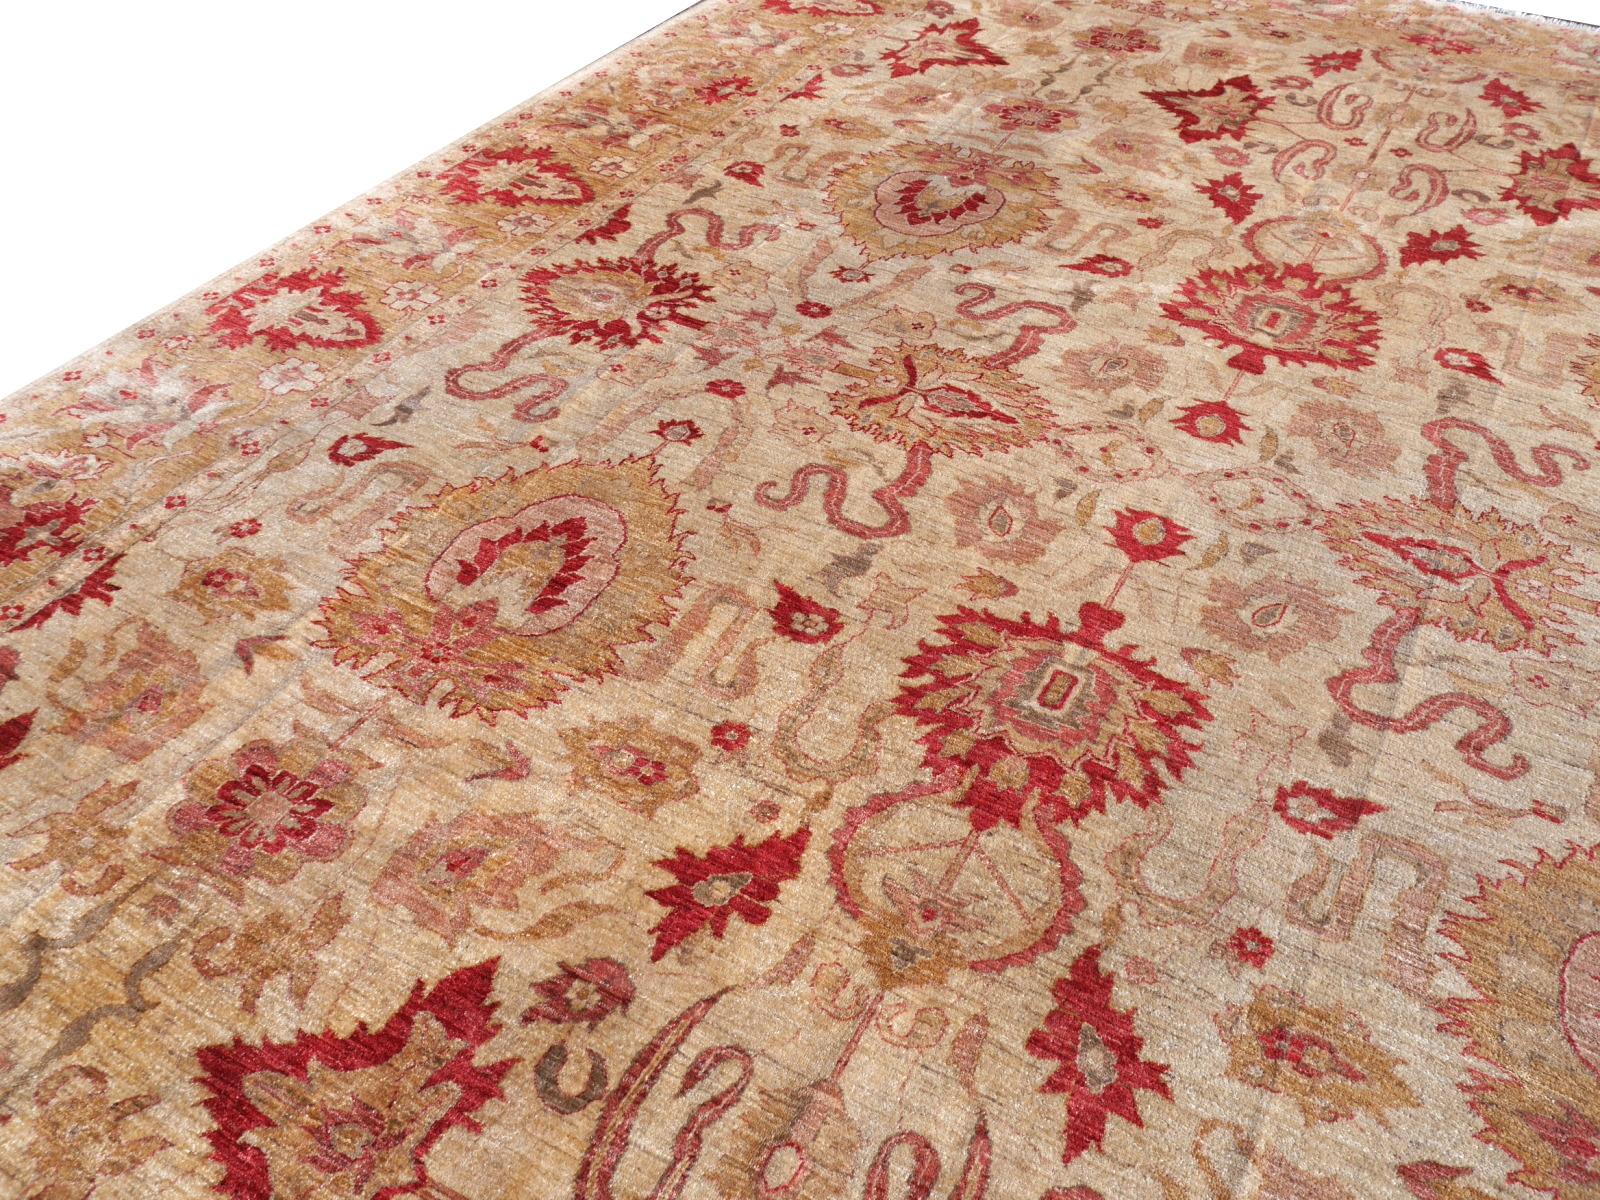 Afghan 18 x 13 ft Rug in Style of Farahan Ziegler Oversized Hand-Knotted 550 x 400 cm For Sale